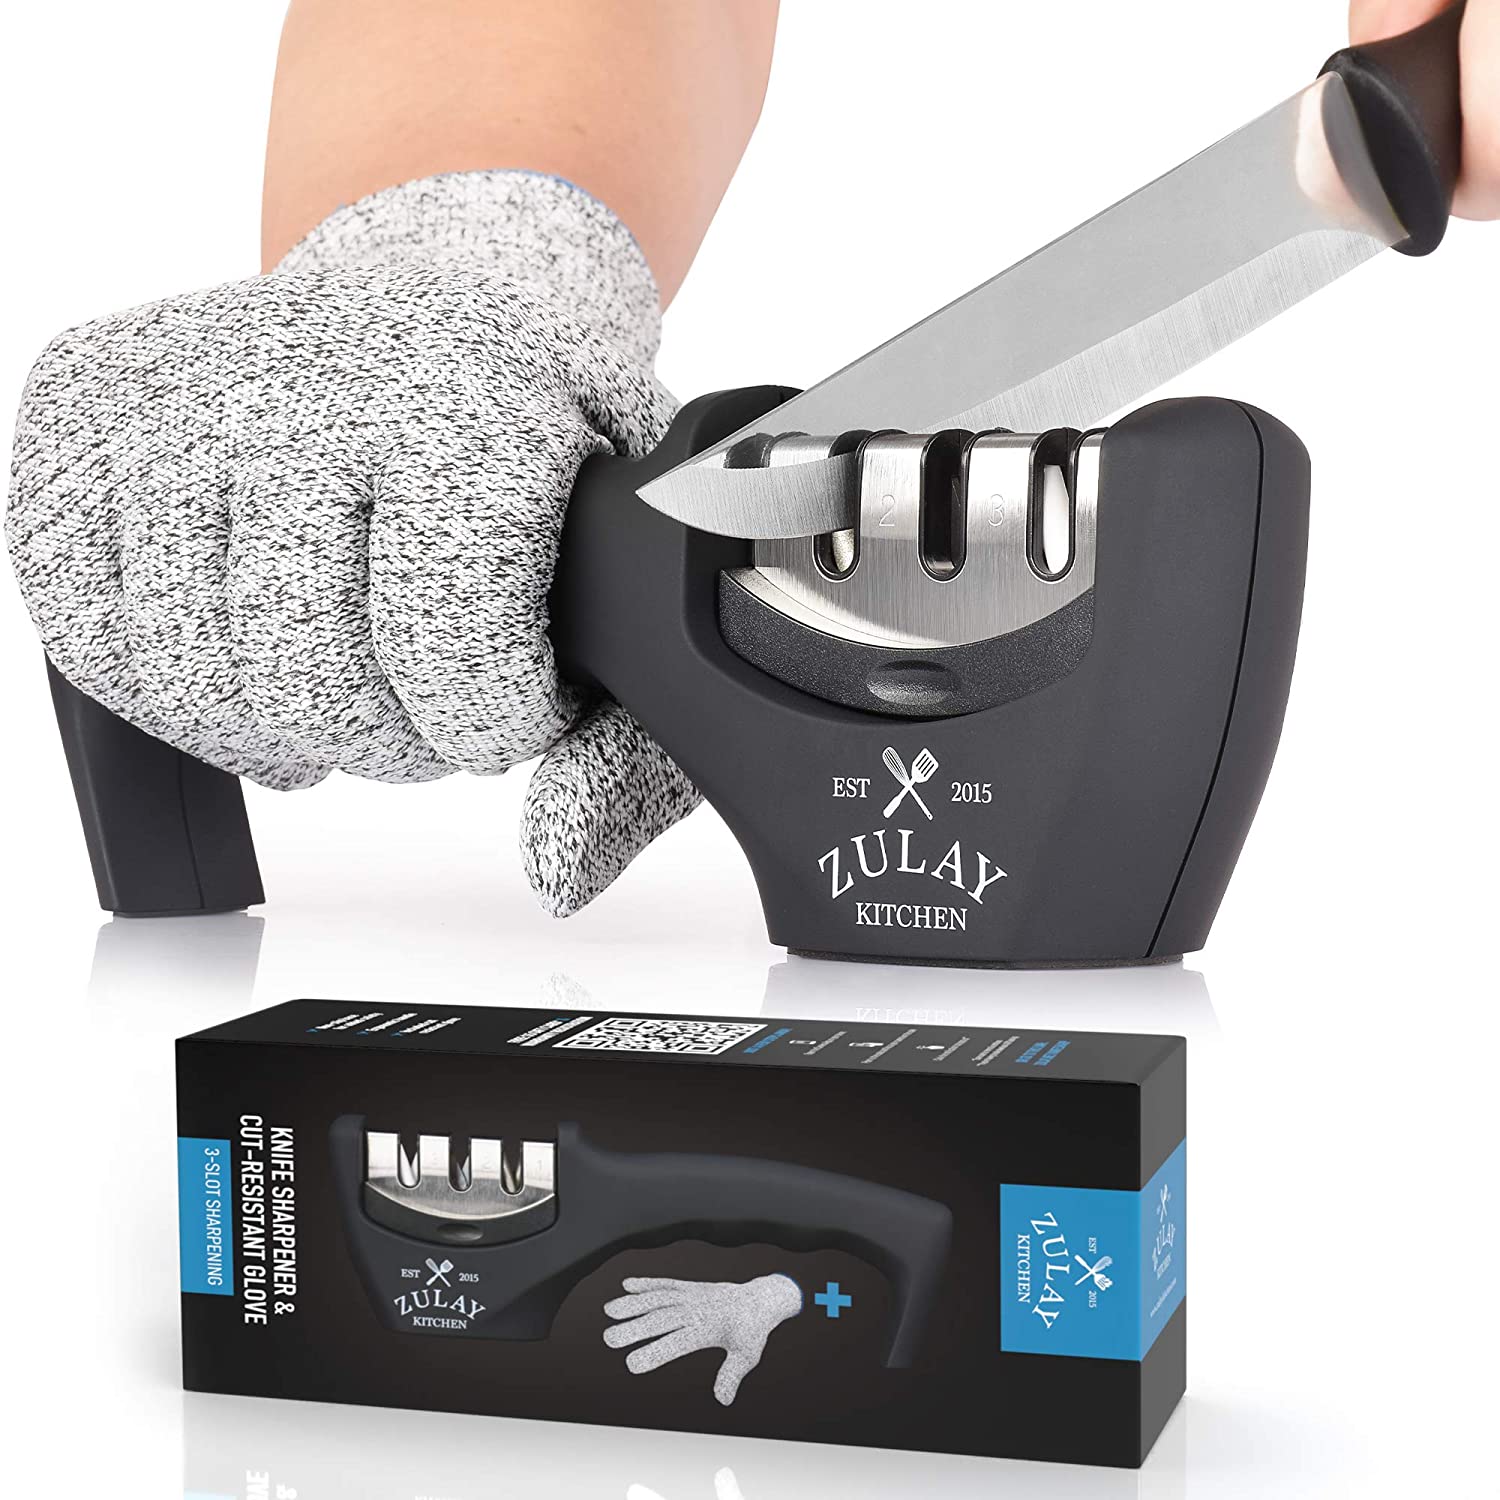 https://cdn.shopify.com/s/files/1/0091/0593/2324/products/zulay-kitchen-3-stage-knife-sharpener-cut-resistant-glovezulay-kitchen-3-stage-knife-sharpener-cut-resistant-glovezulay-kitchenzulay-kitchenz-knf-shrpnr-glv-3-s-754081.jpg?v=1684848828&width=1500